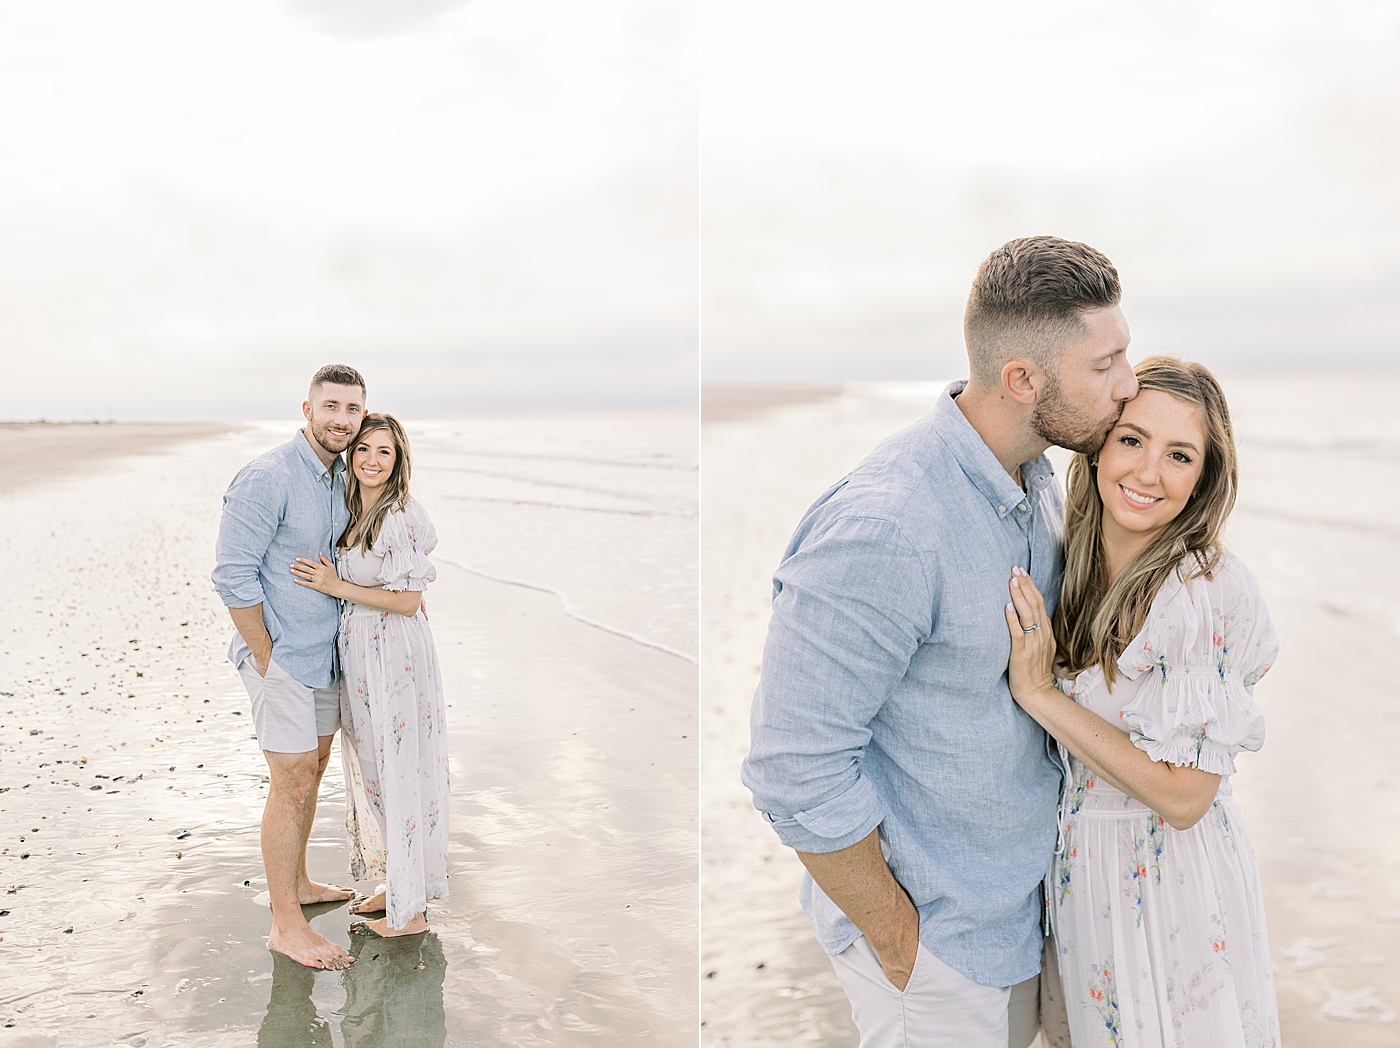 Mom and dad snuggling near the ocean | Preparing for Family Beach Session with Caitlyn Motycka